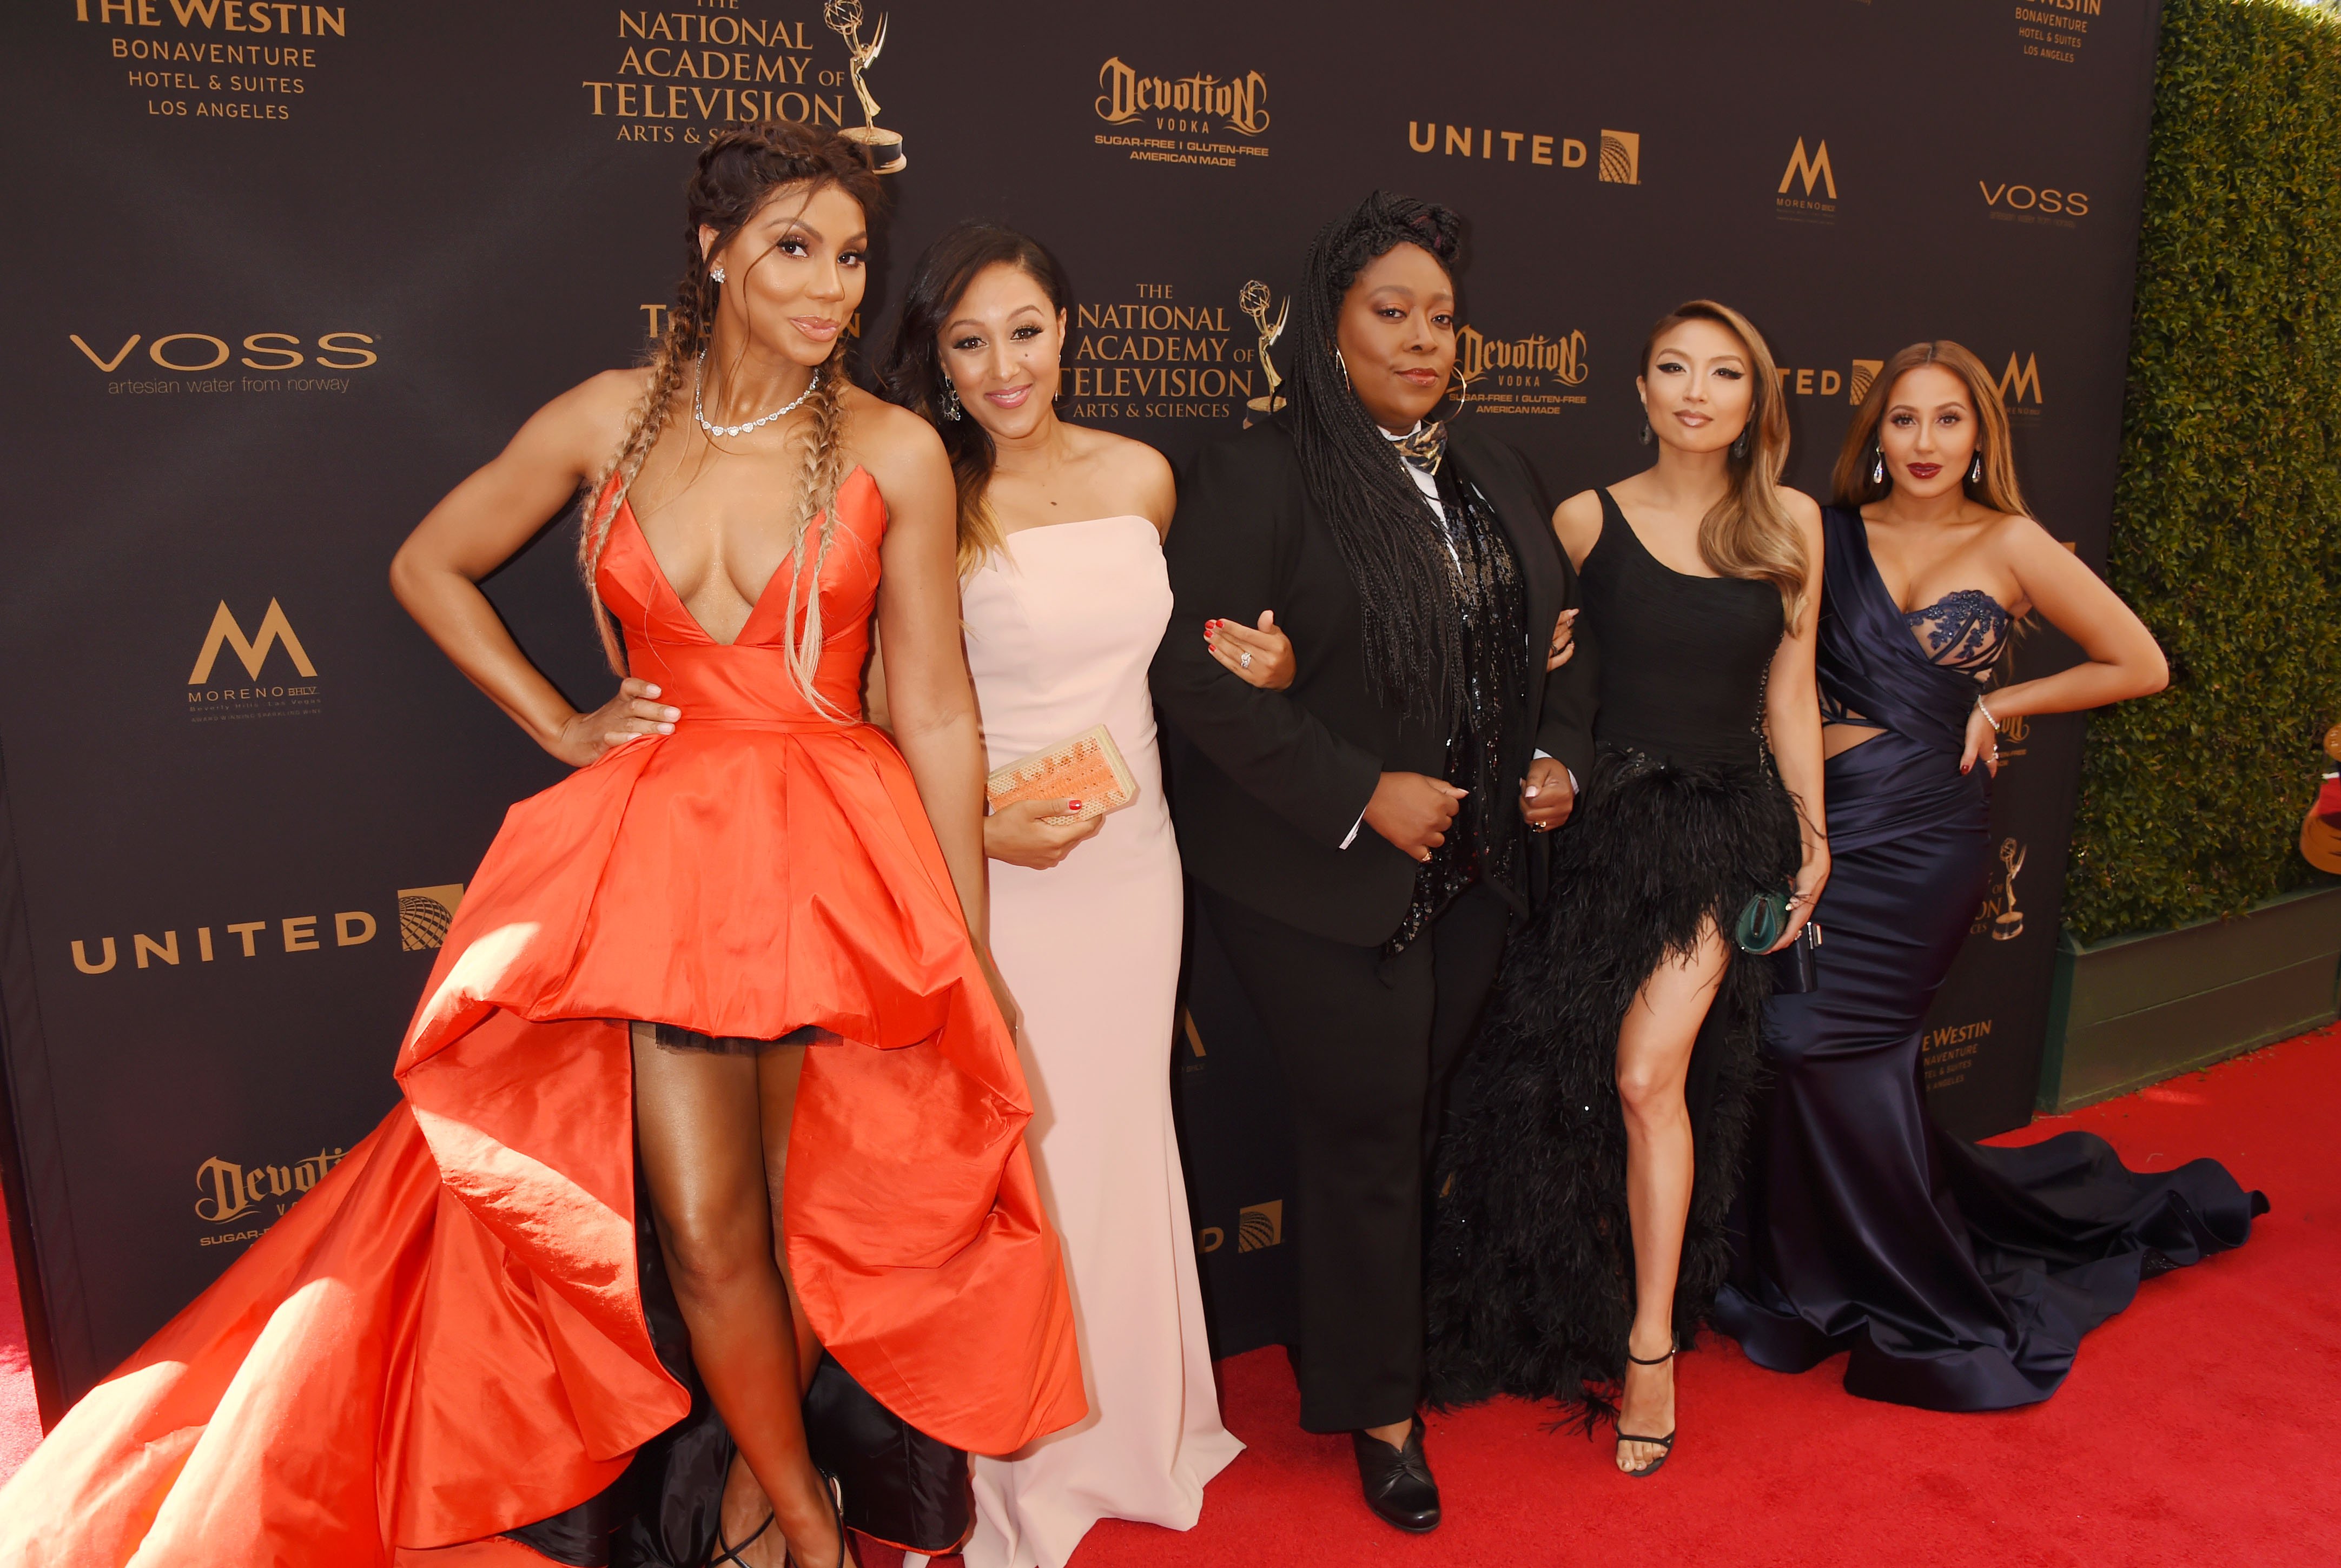 Tamar Braxton, Tamera Mowry Housley, Loni Love, Jeannie Mai and Adrienne Bailon attend the 2016 Daytime Emmy Awards at Westin Bonaventure Hotel on May 1, 2016 in Los Angeles, California. | Photo: Getty Images